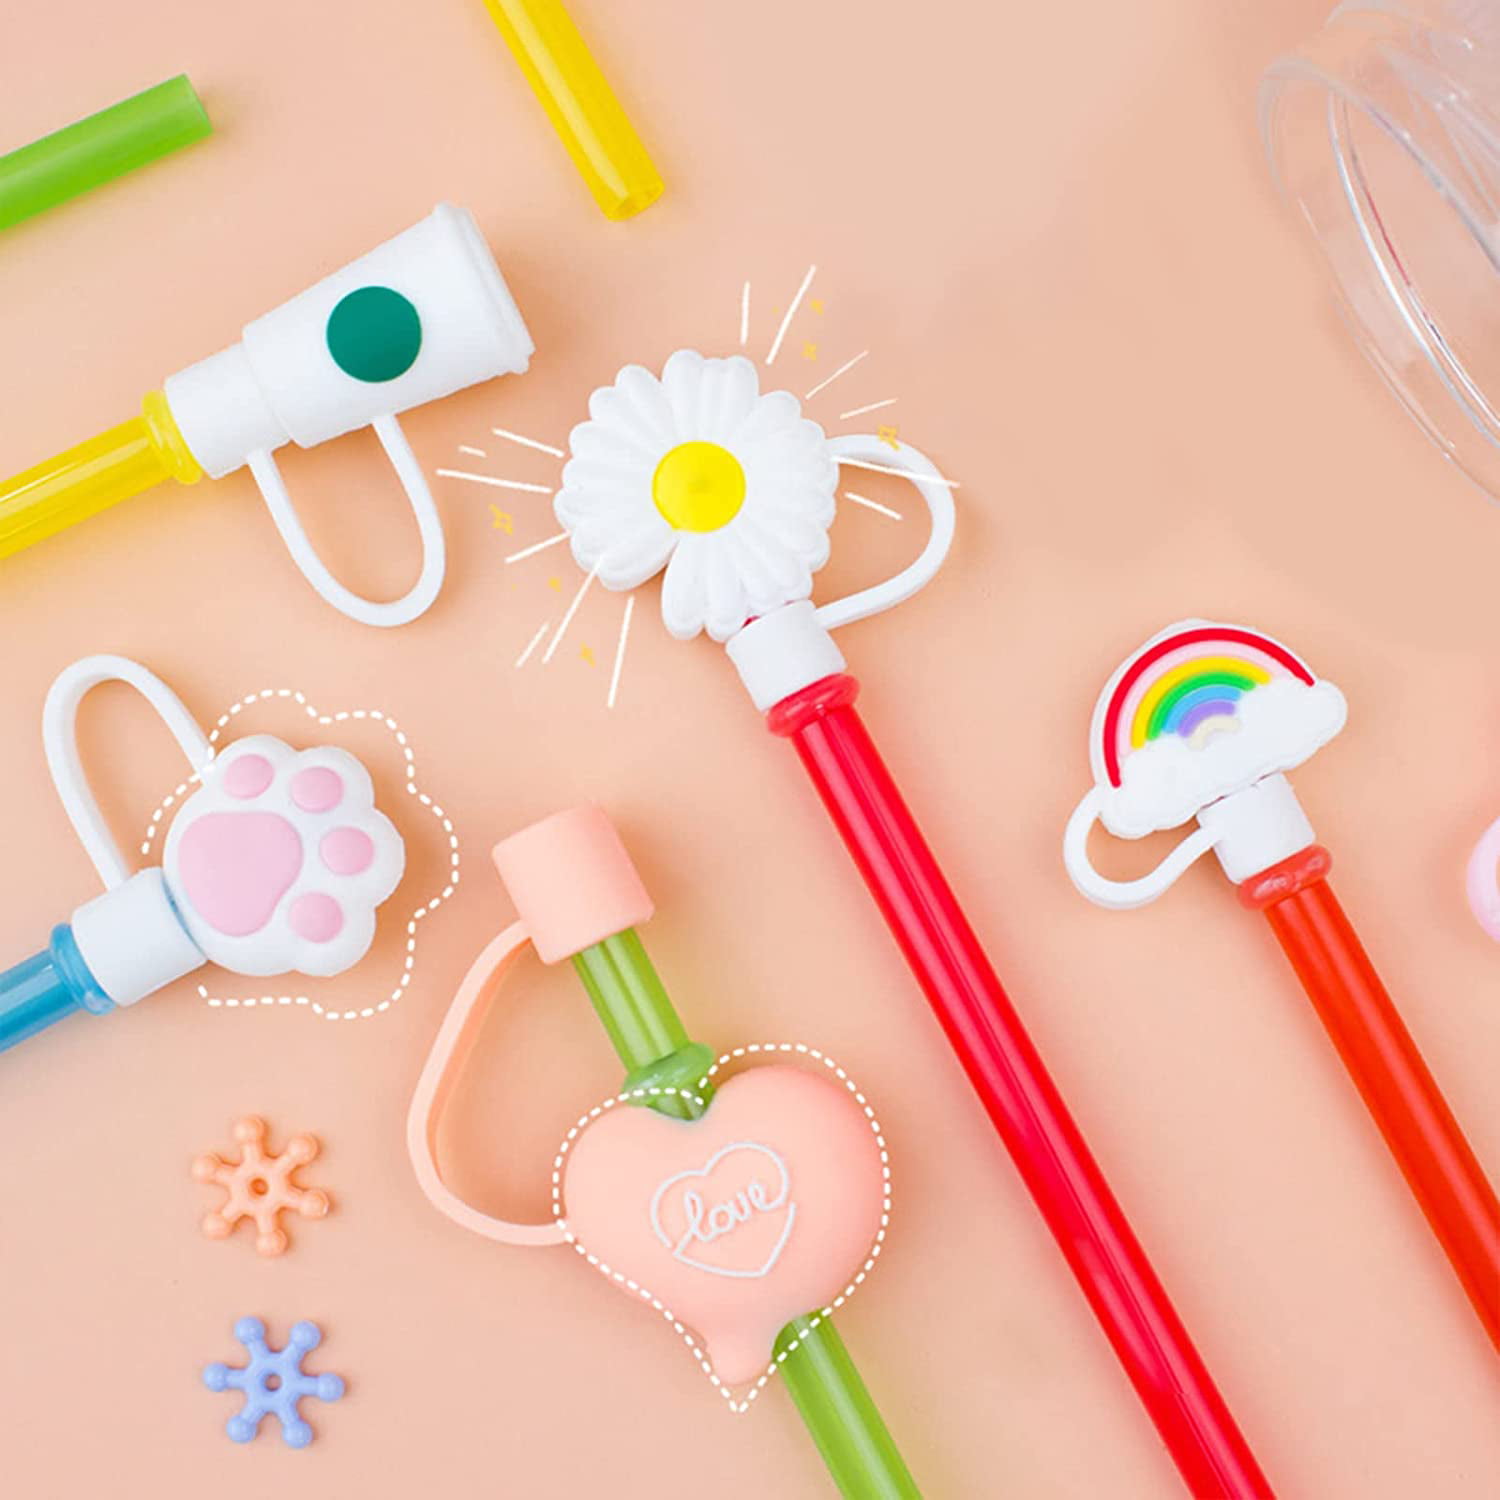 Silicone Straw Tip Covers Cap Reusable Straw Plugs Anti- Straw Tip Lids  Cartoon Straw Charms For 6-8 Mm Straws